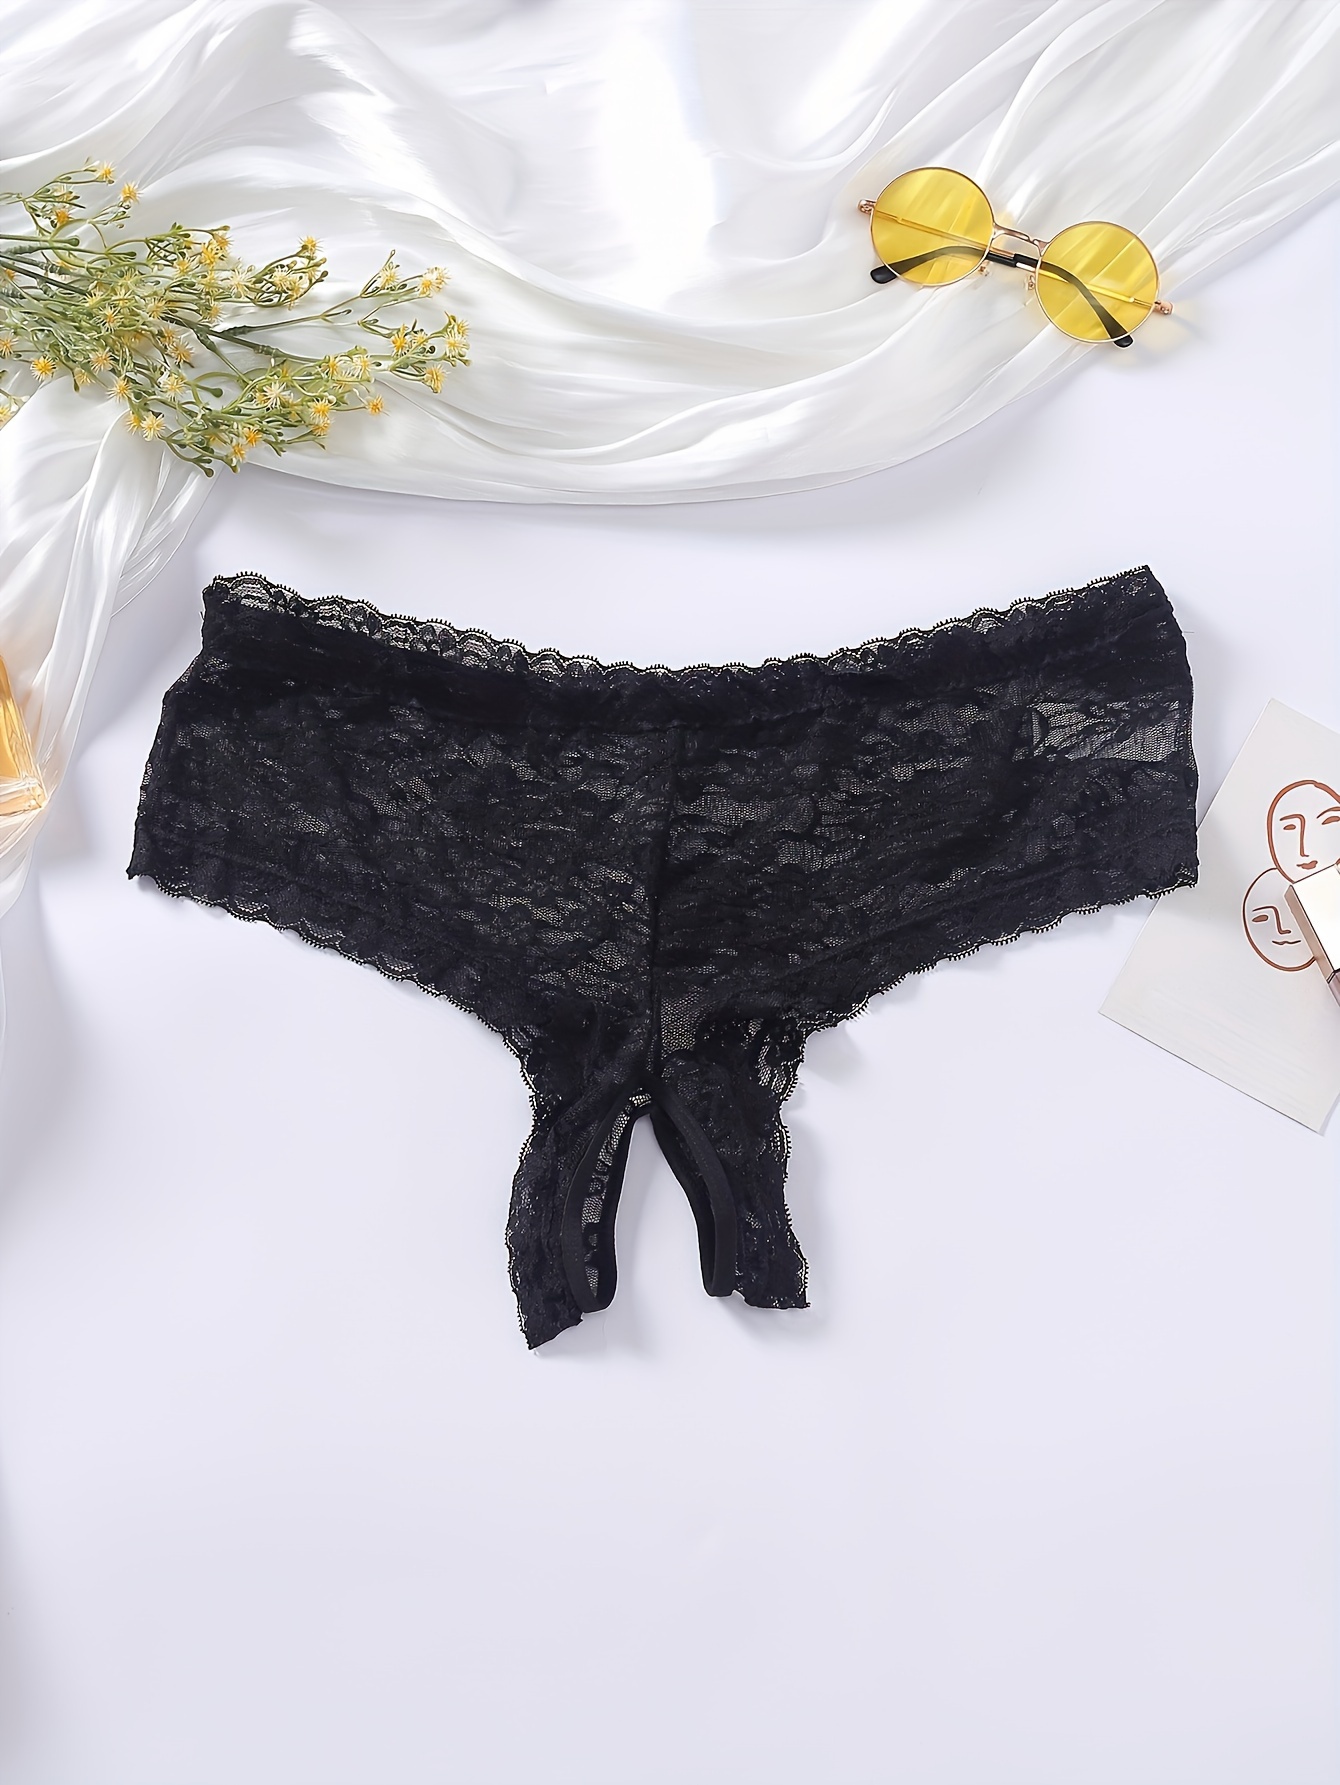 Exotic Floral Lace Edge Crotchless Mens Lace Briefs For Women